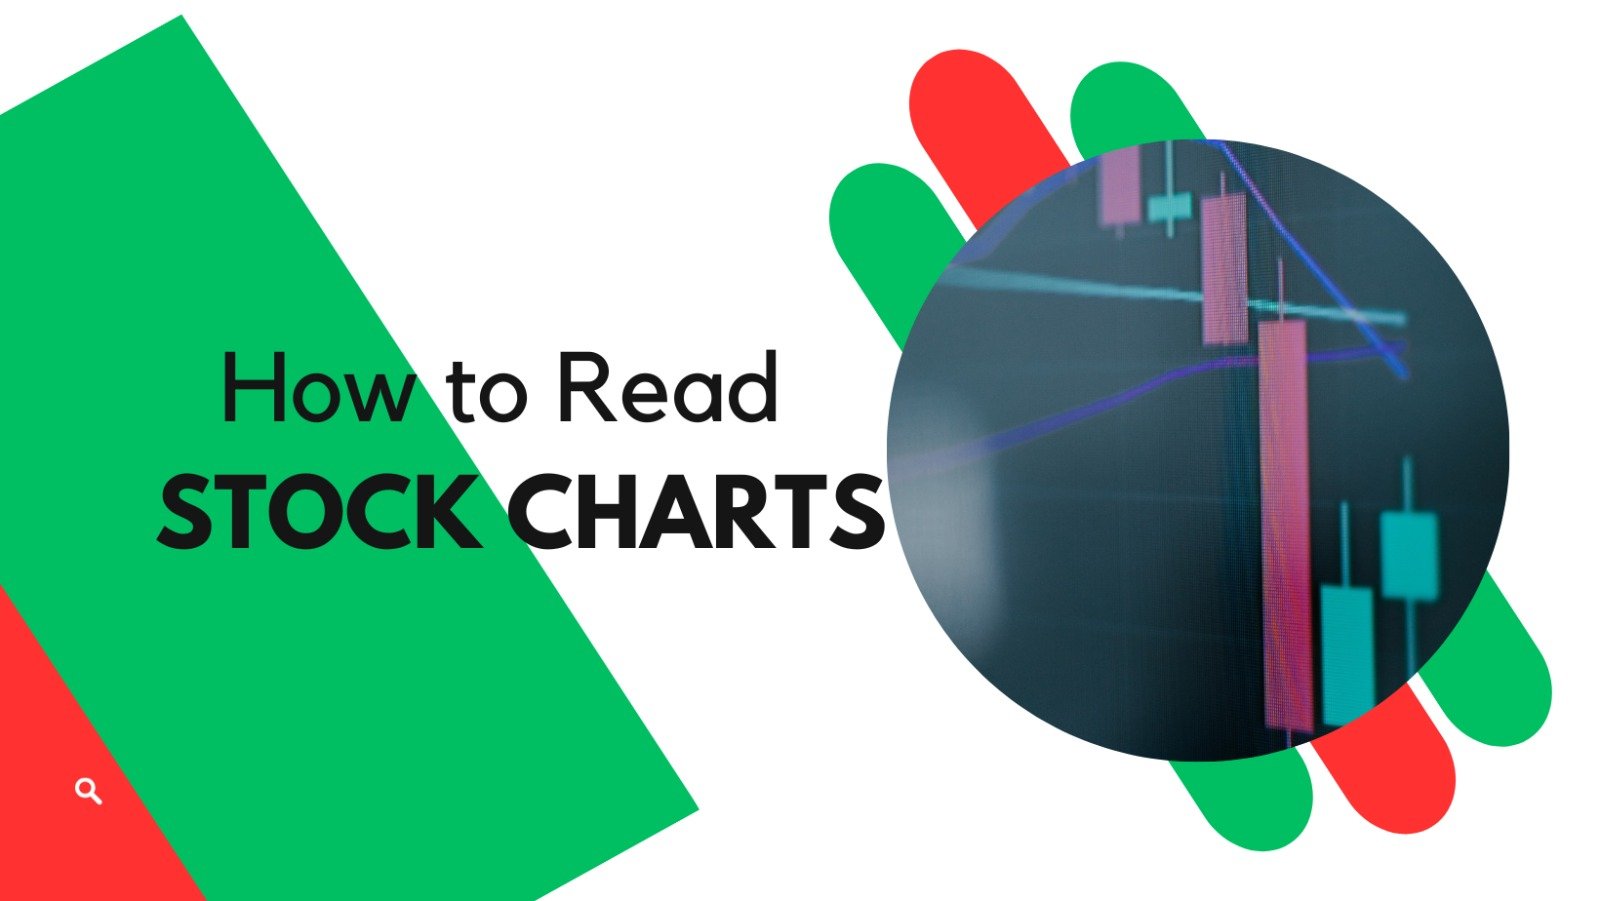 How to Read Stock Charts?